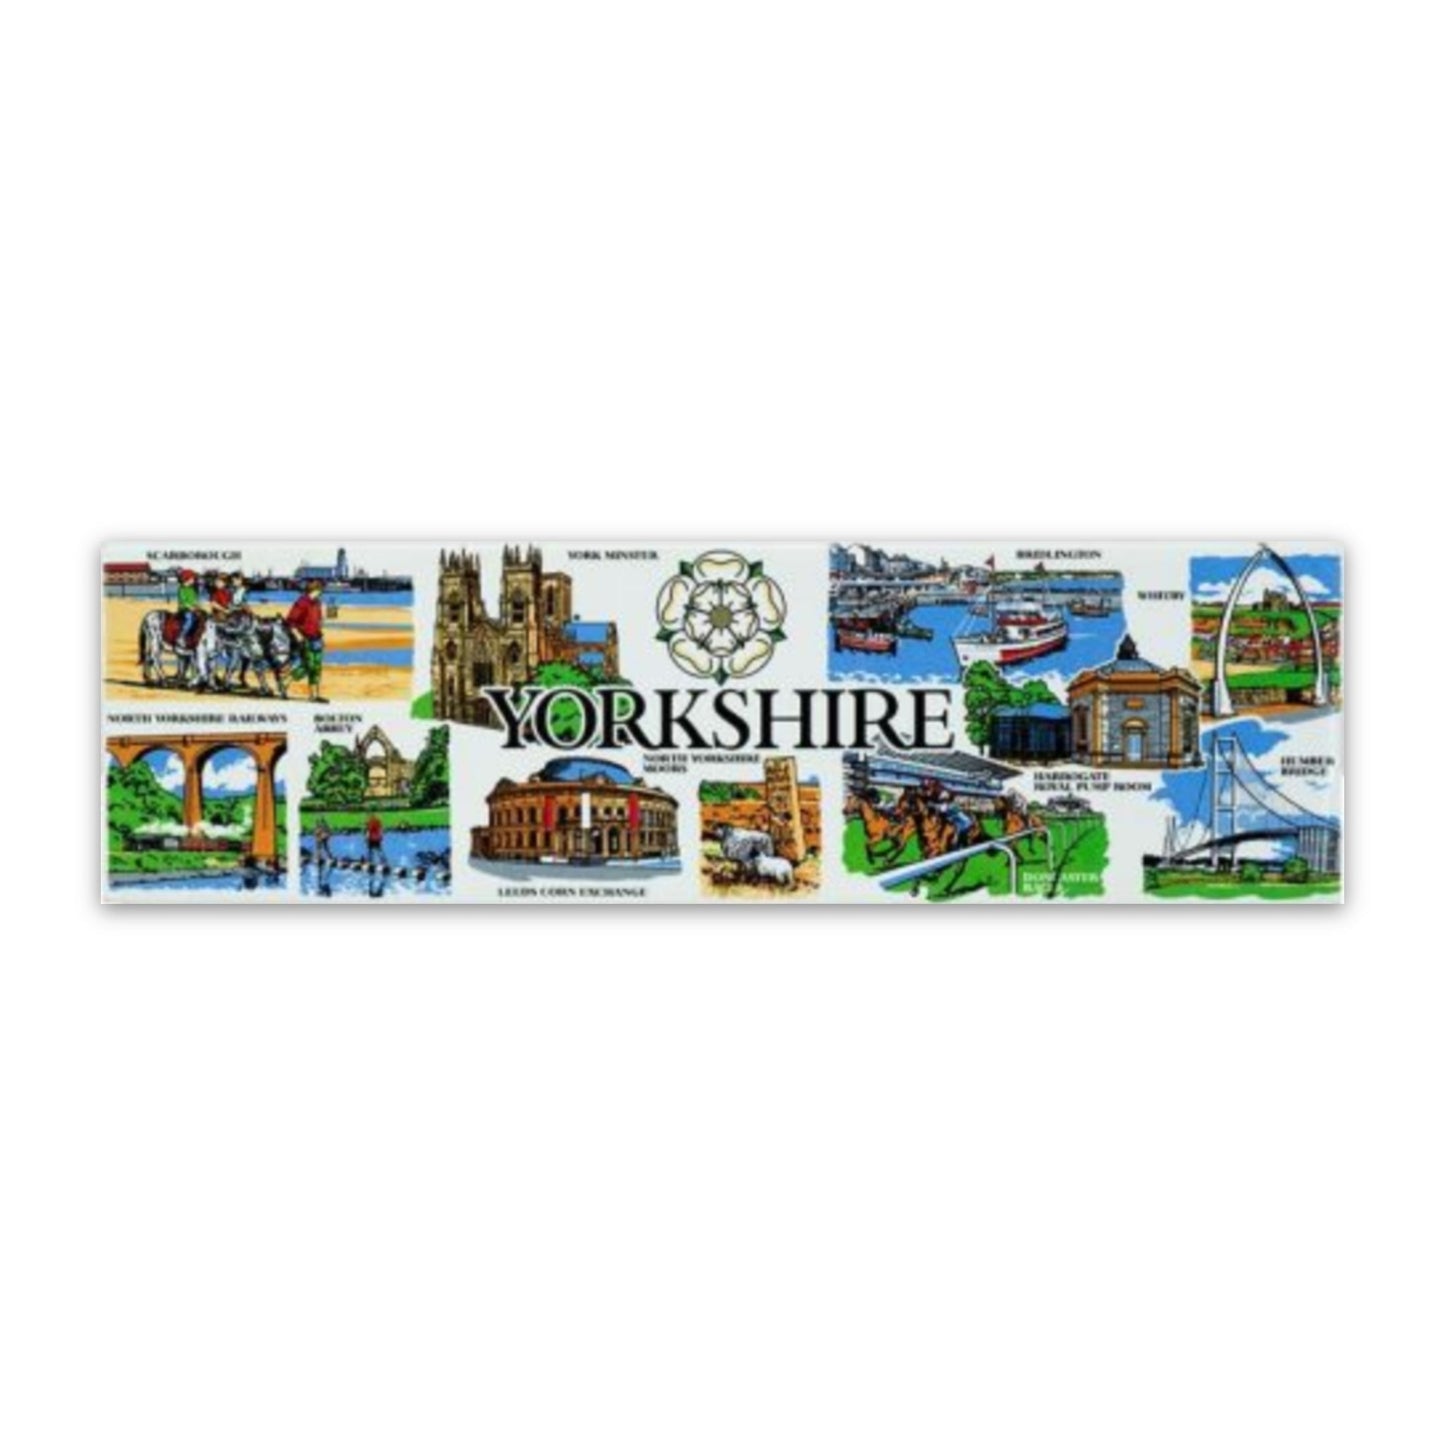 Sights of Yorkshire Magnet - The Great Yorkshire Shop